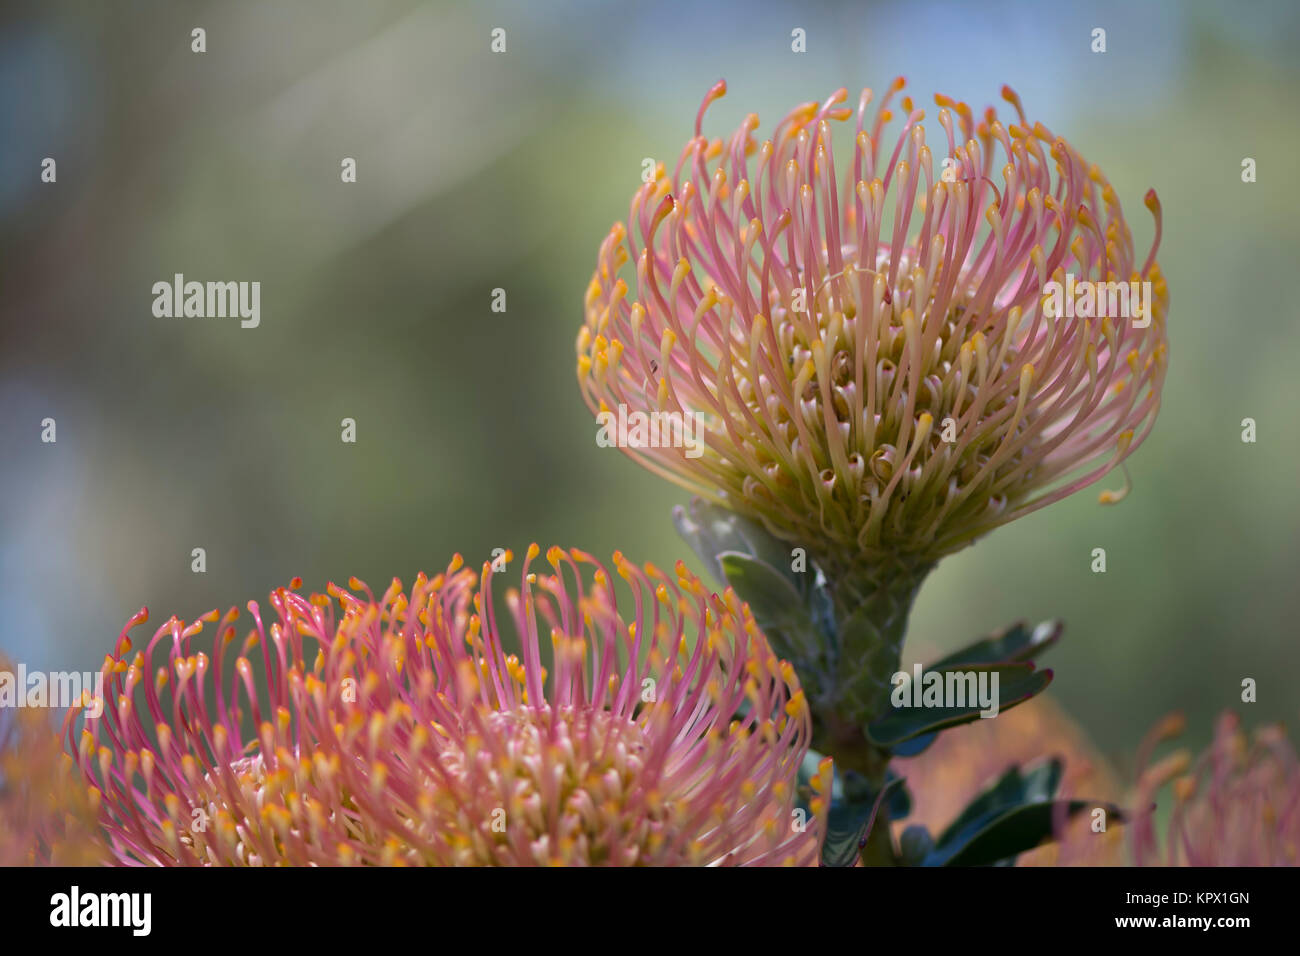 Leucospermum Cordifolium, Nodding Pincushion Flowers, which are native to South Africa. Selectively focused and in it's natural setting in the garden  Stock Photo